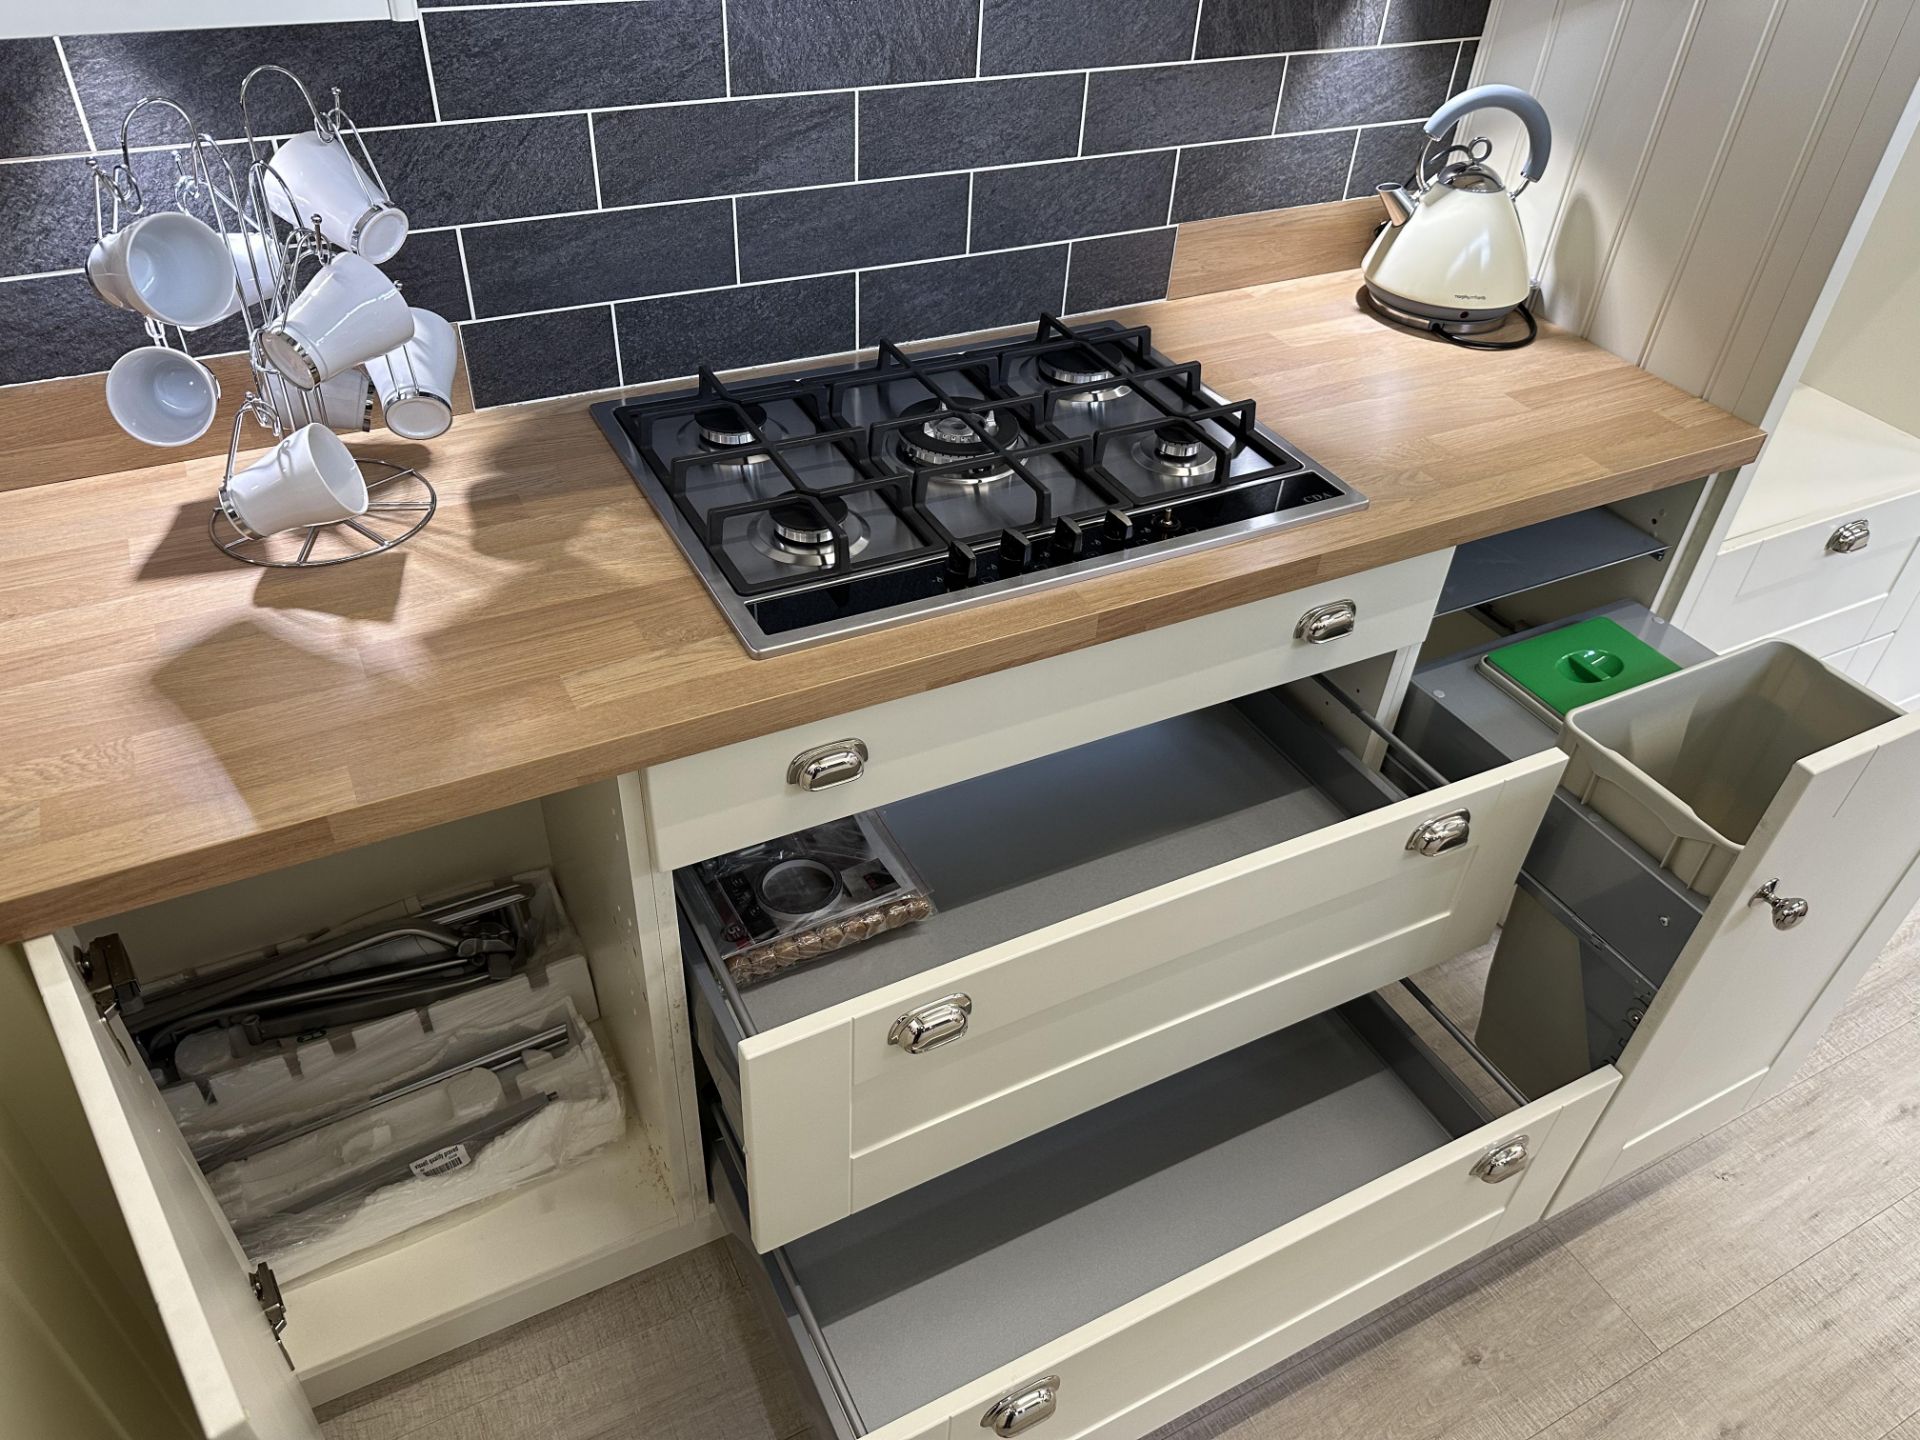 Omega English Rose Kitchen Display w/ Hob, Extractor, Sink & Tap - RRP£11,866 - See Pics & Desc - Image 22 of 25